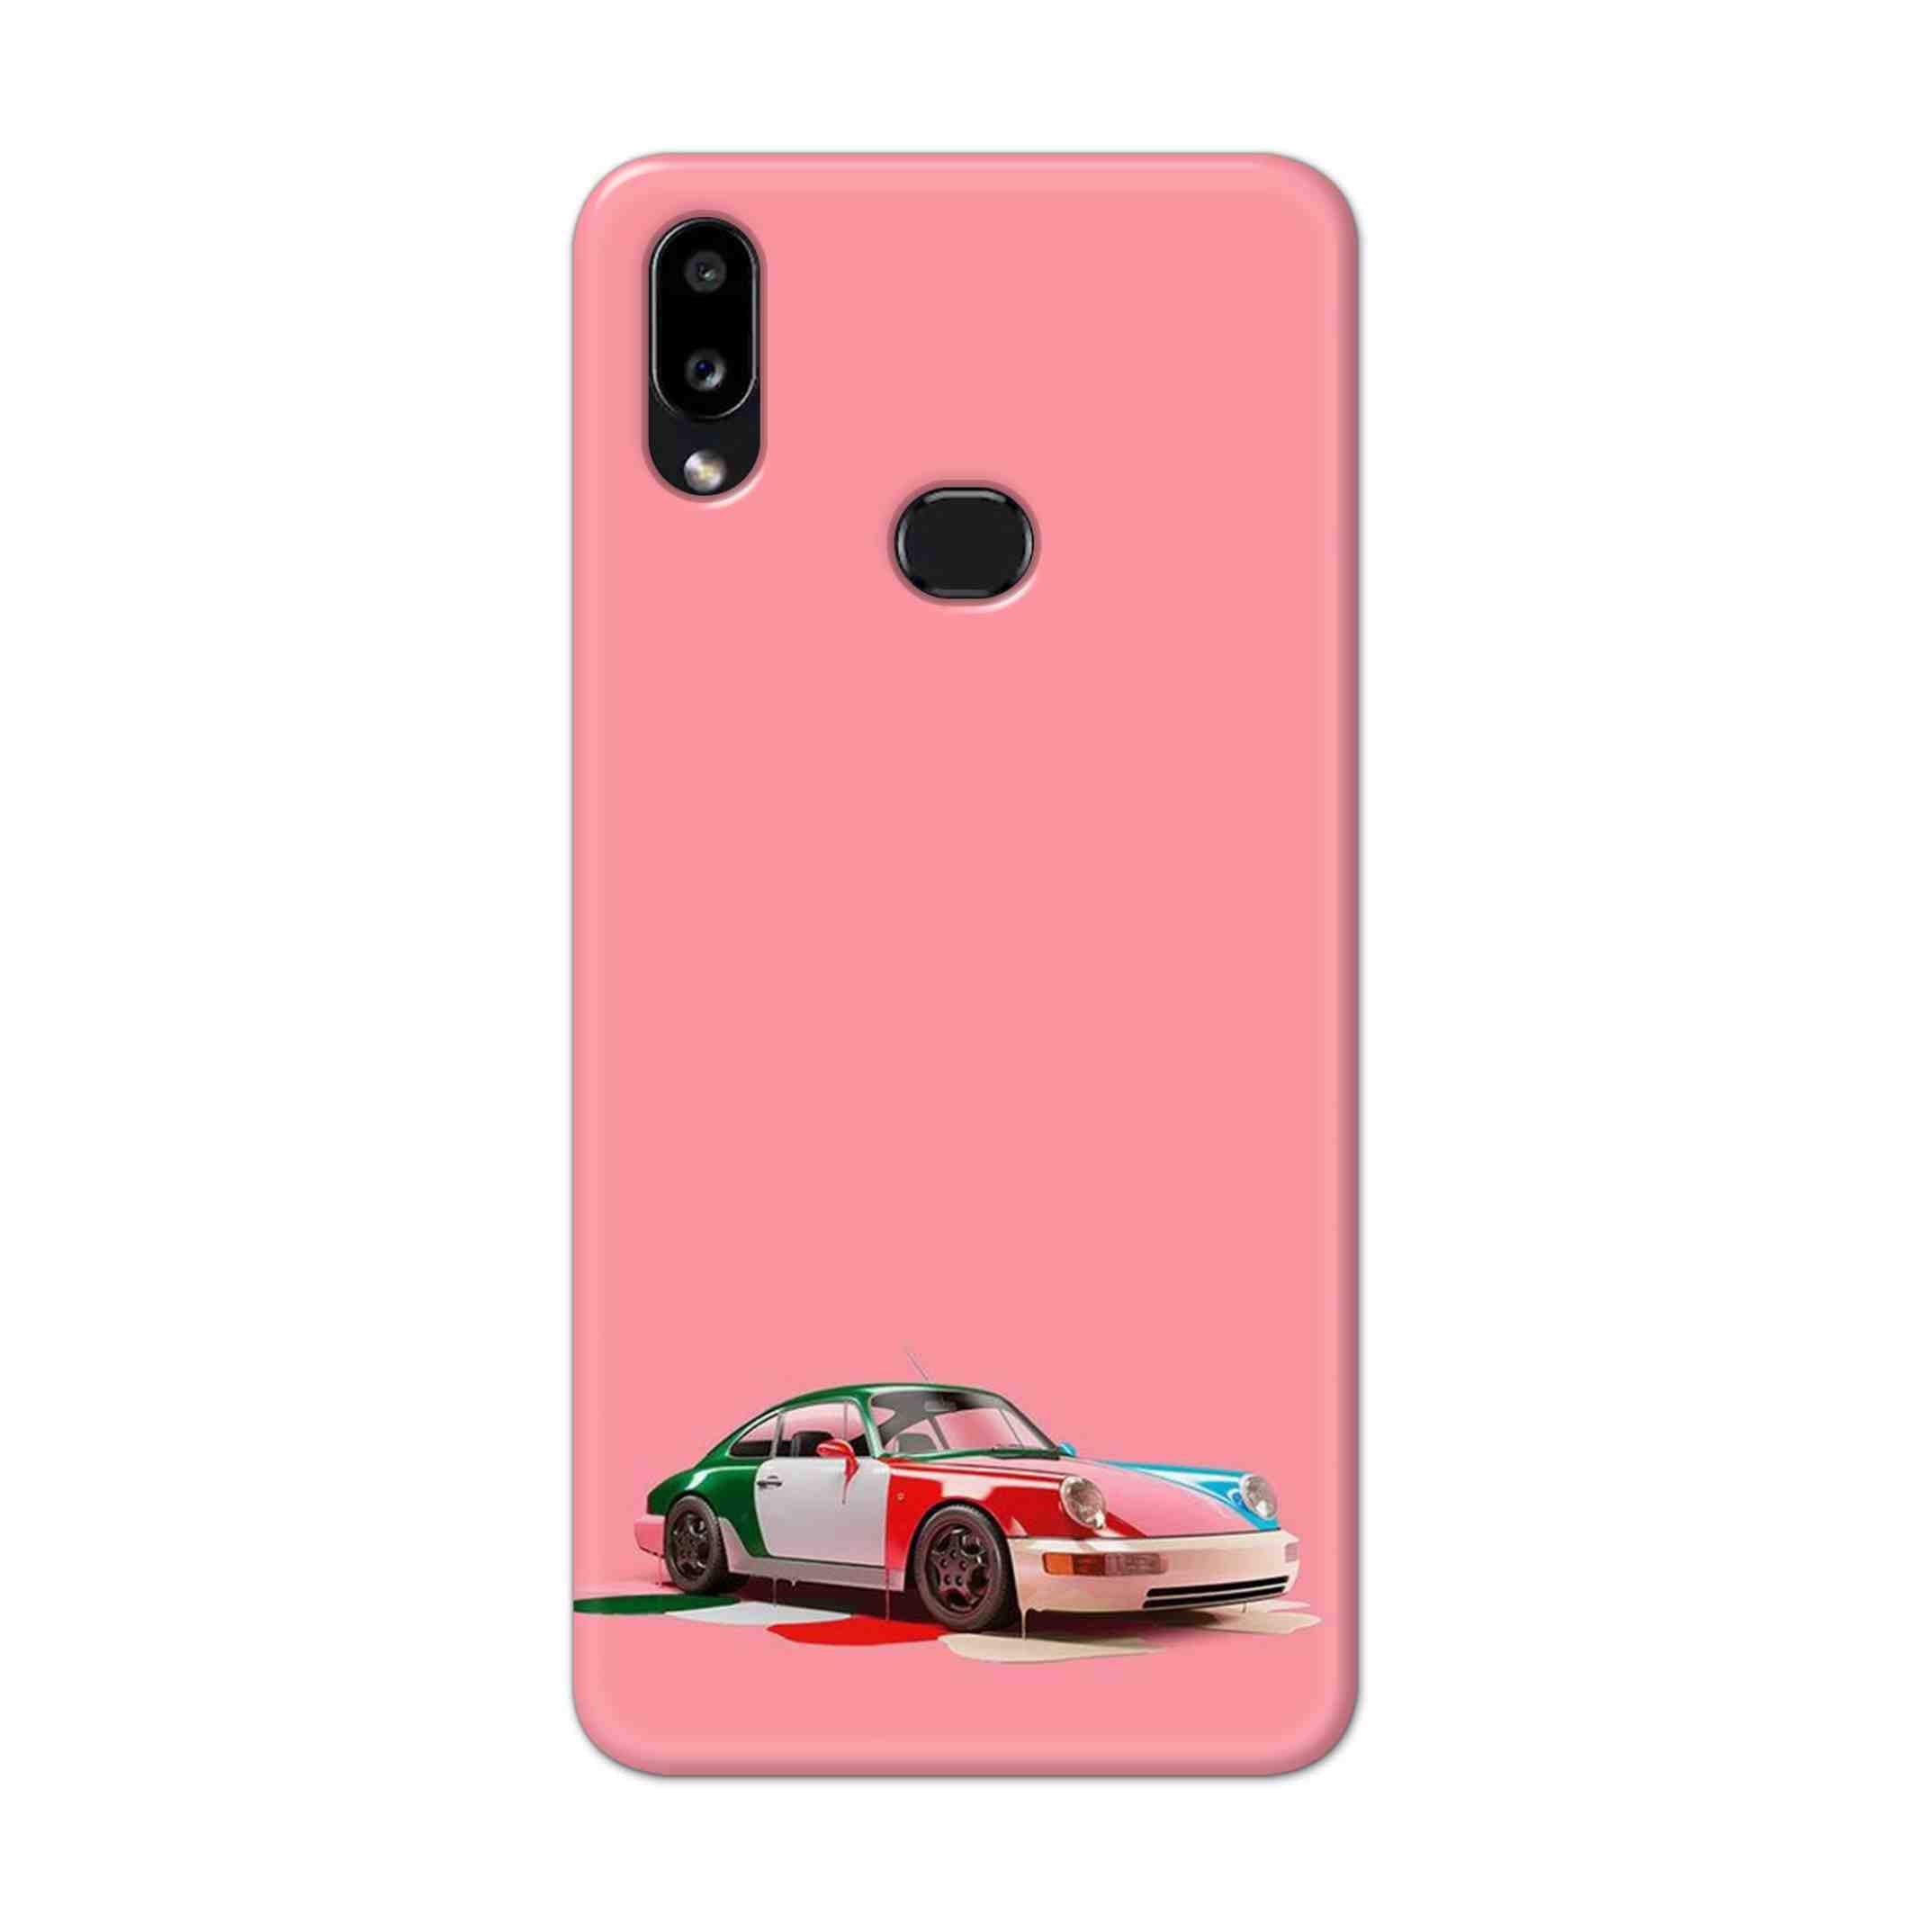 Buy Pink Porche Hard Back Mobile Phone Case Cover For Samsung Galaxy M01s Online